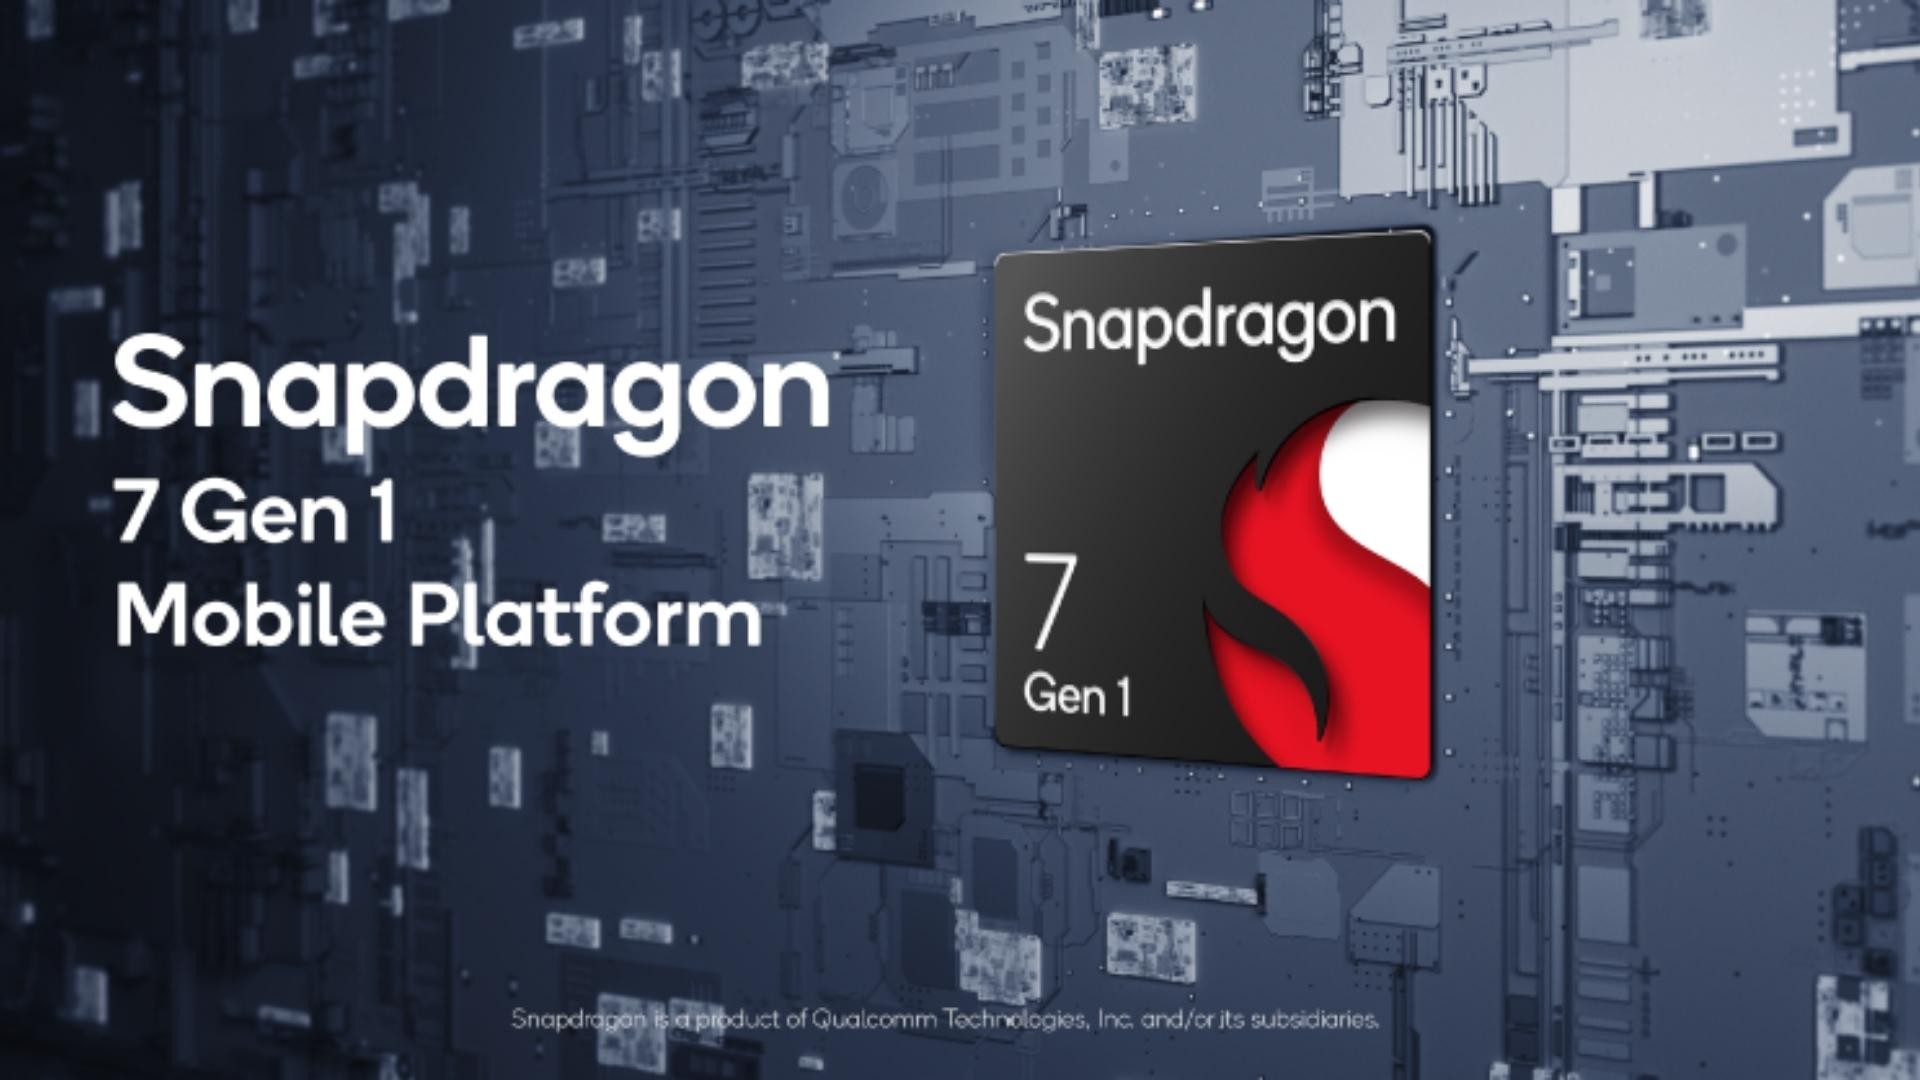 Qualcomm Snapdragon 7 Gen 1: More efficient and faster SoC for midrangers